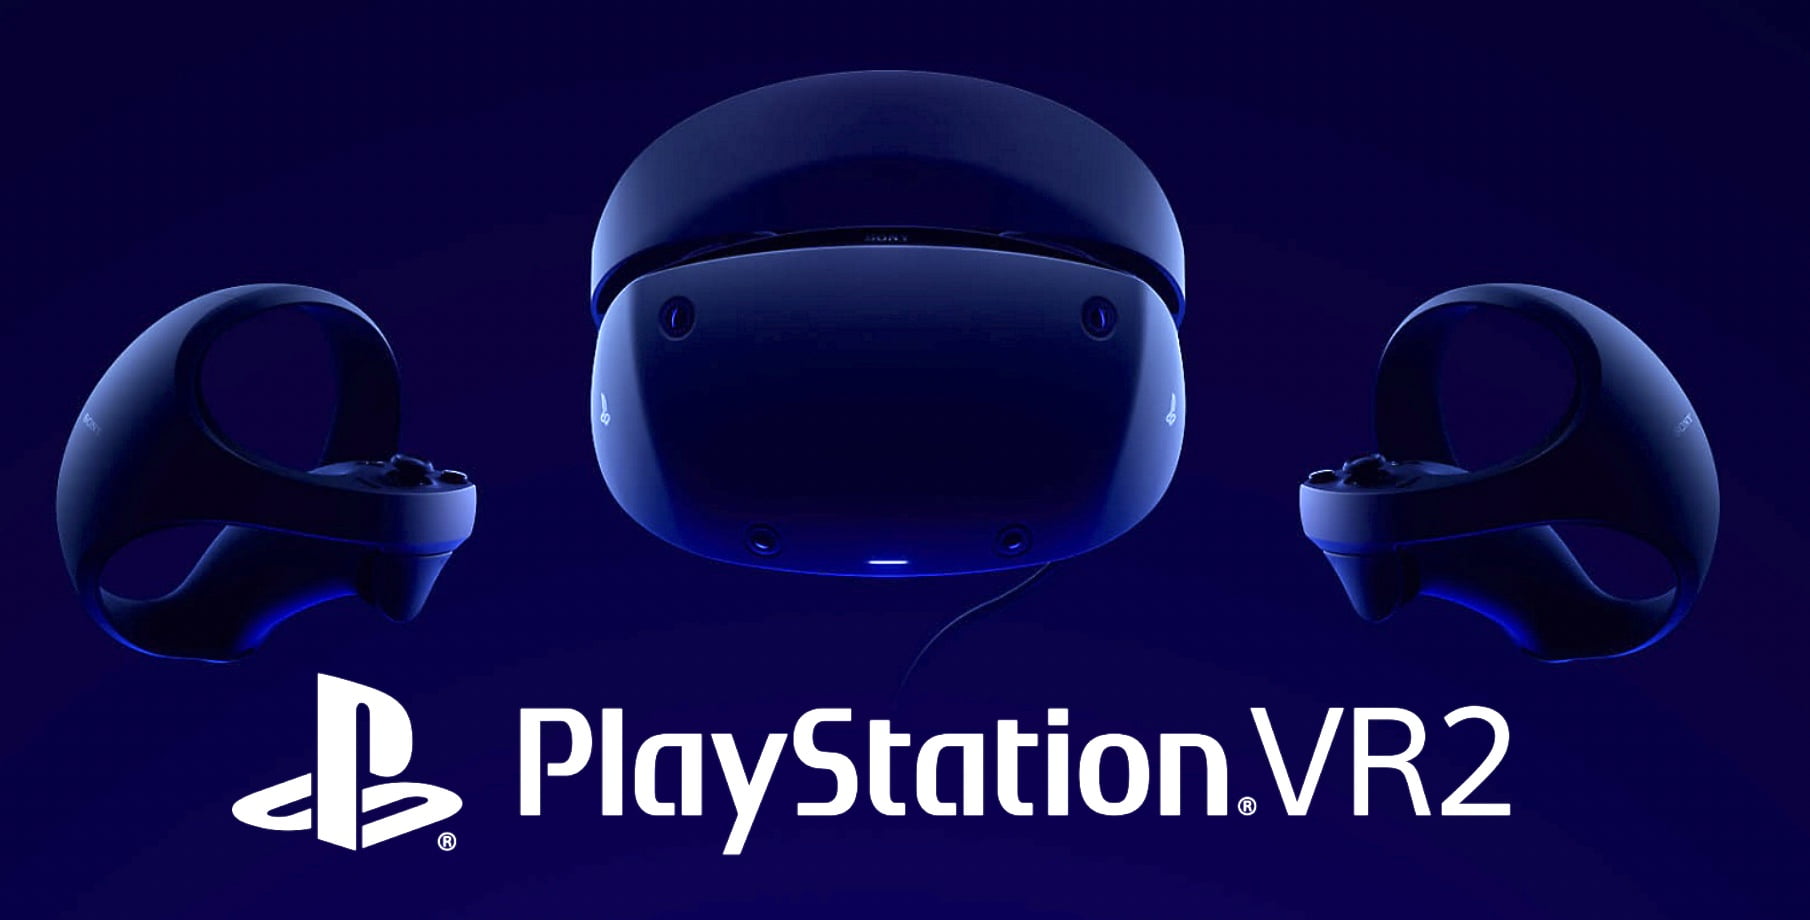 You can sign up now for PlayStation VR 2 pre-order notifications.